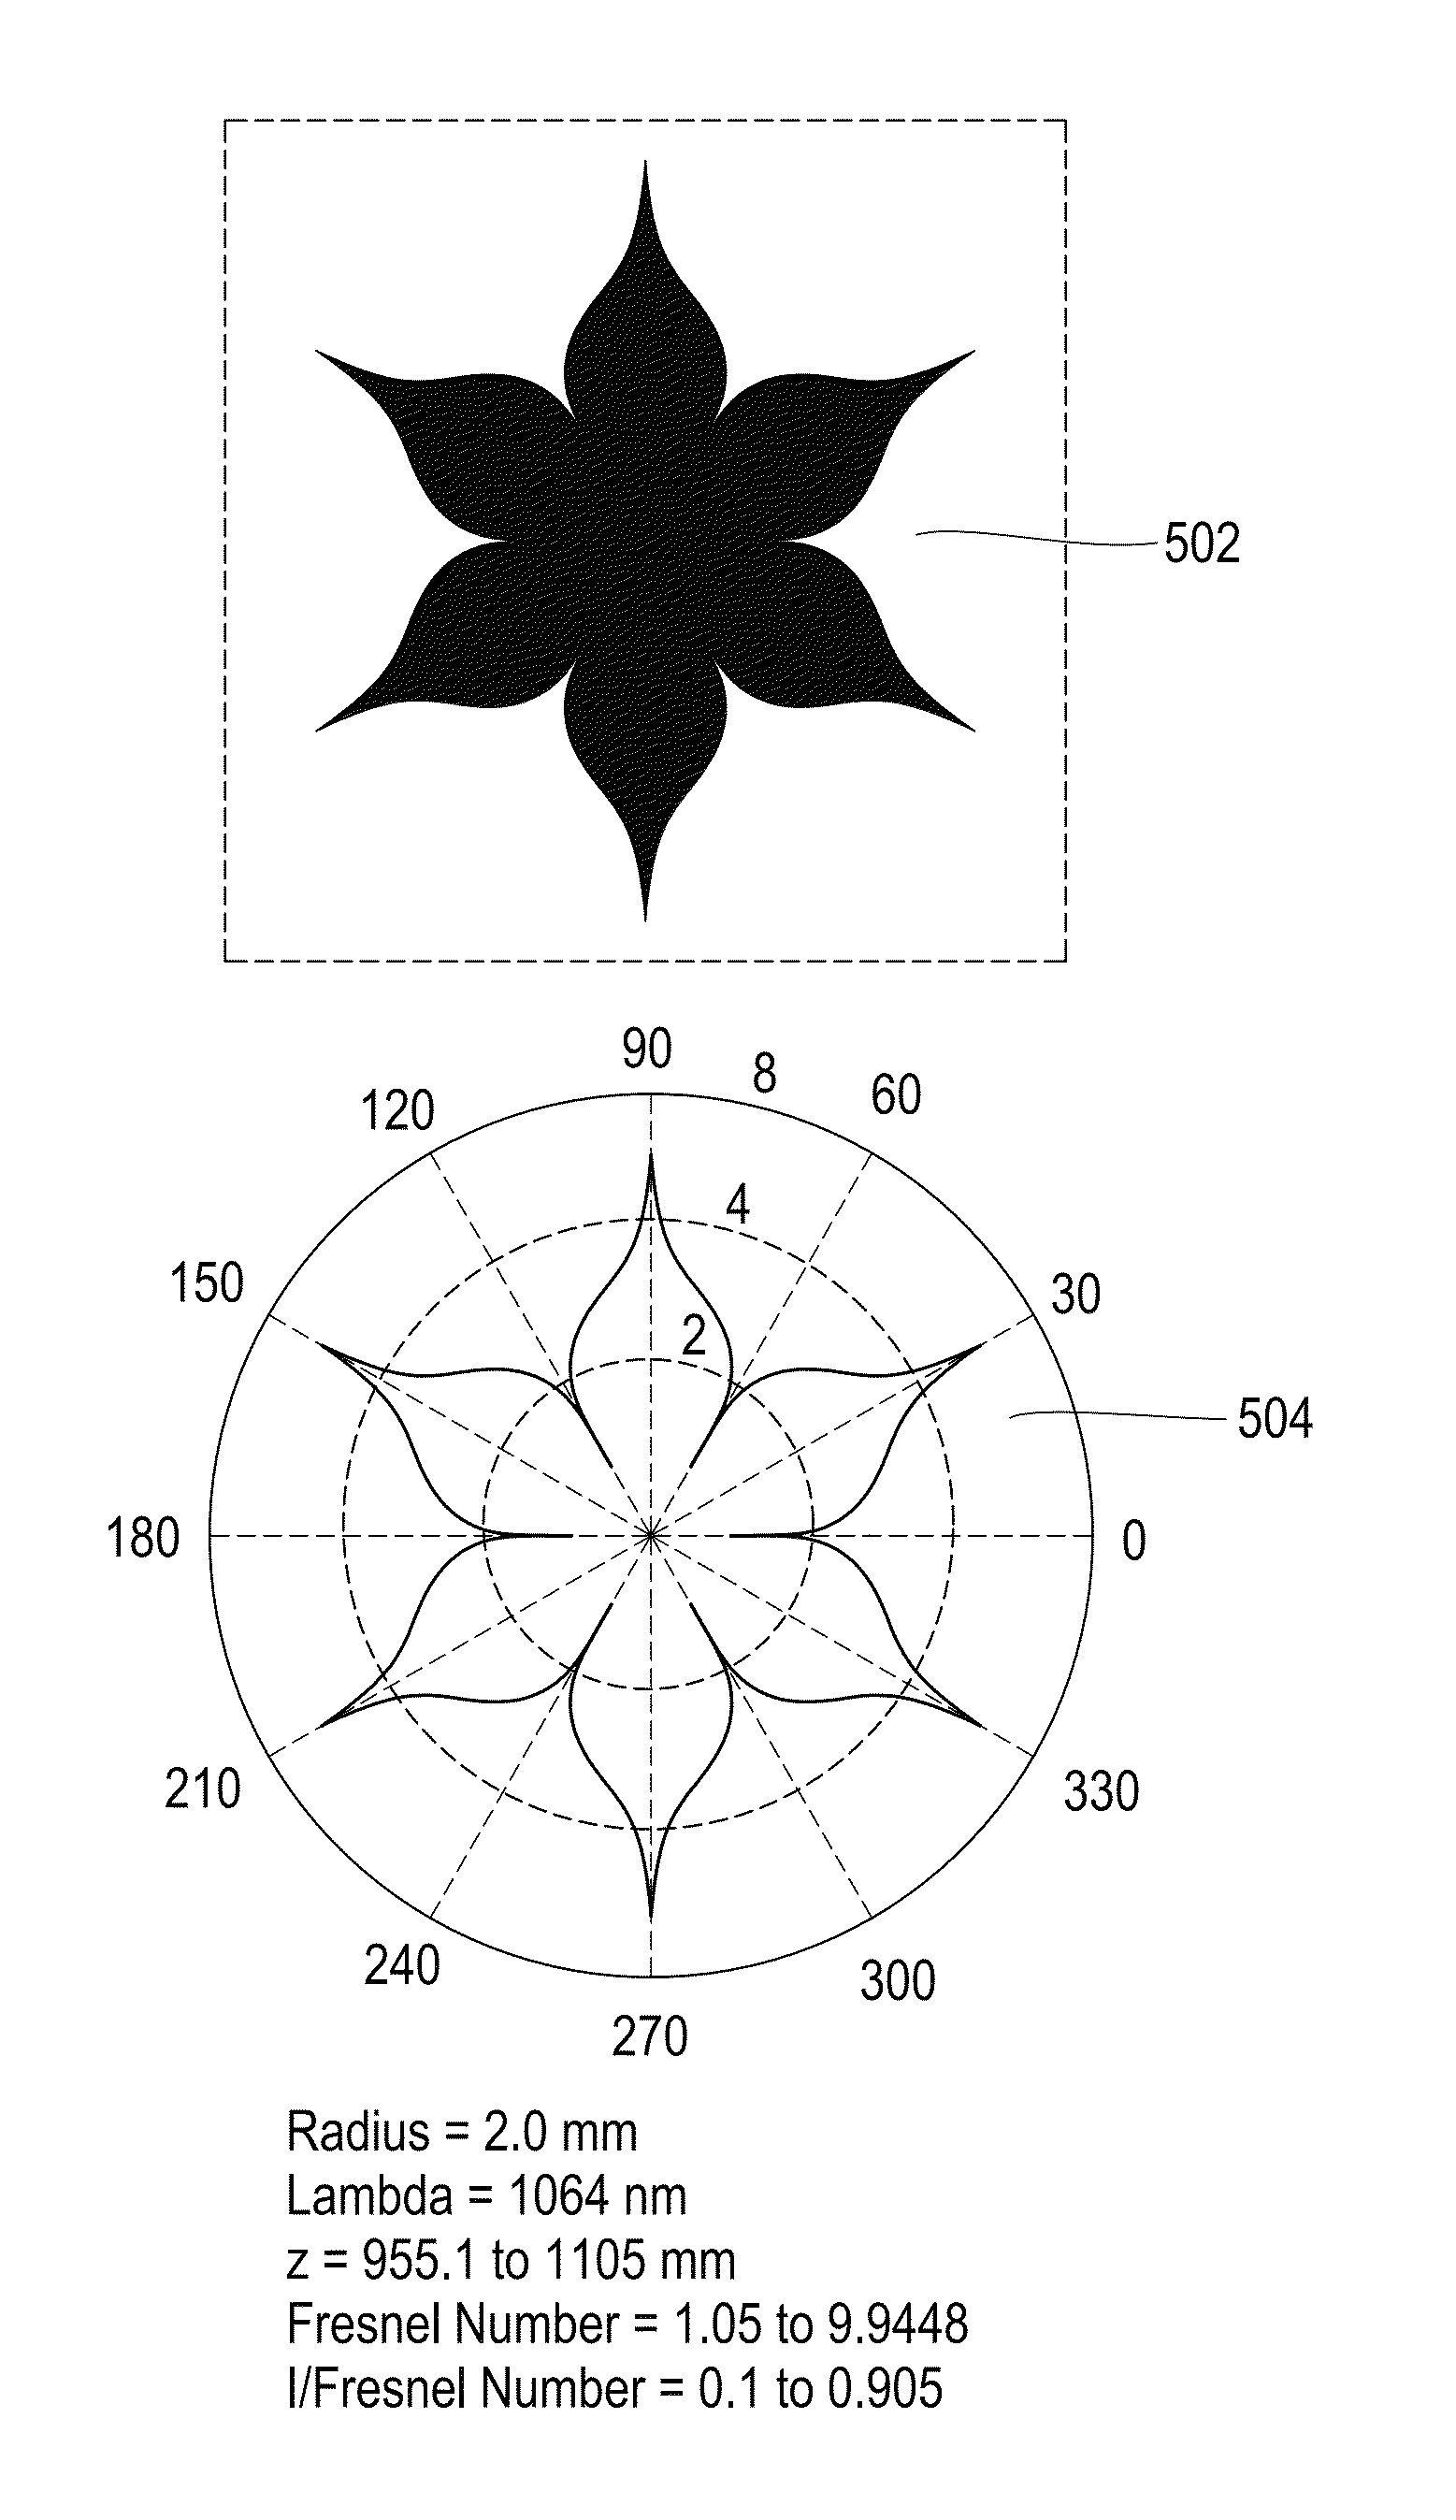 System and method for nanostructure apodization mask for transmitter signal suppression in a duplex telescope